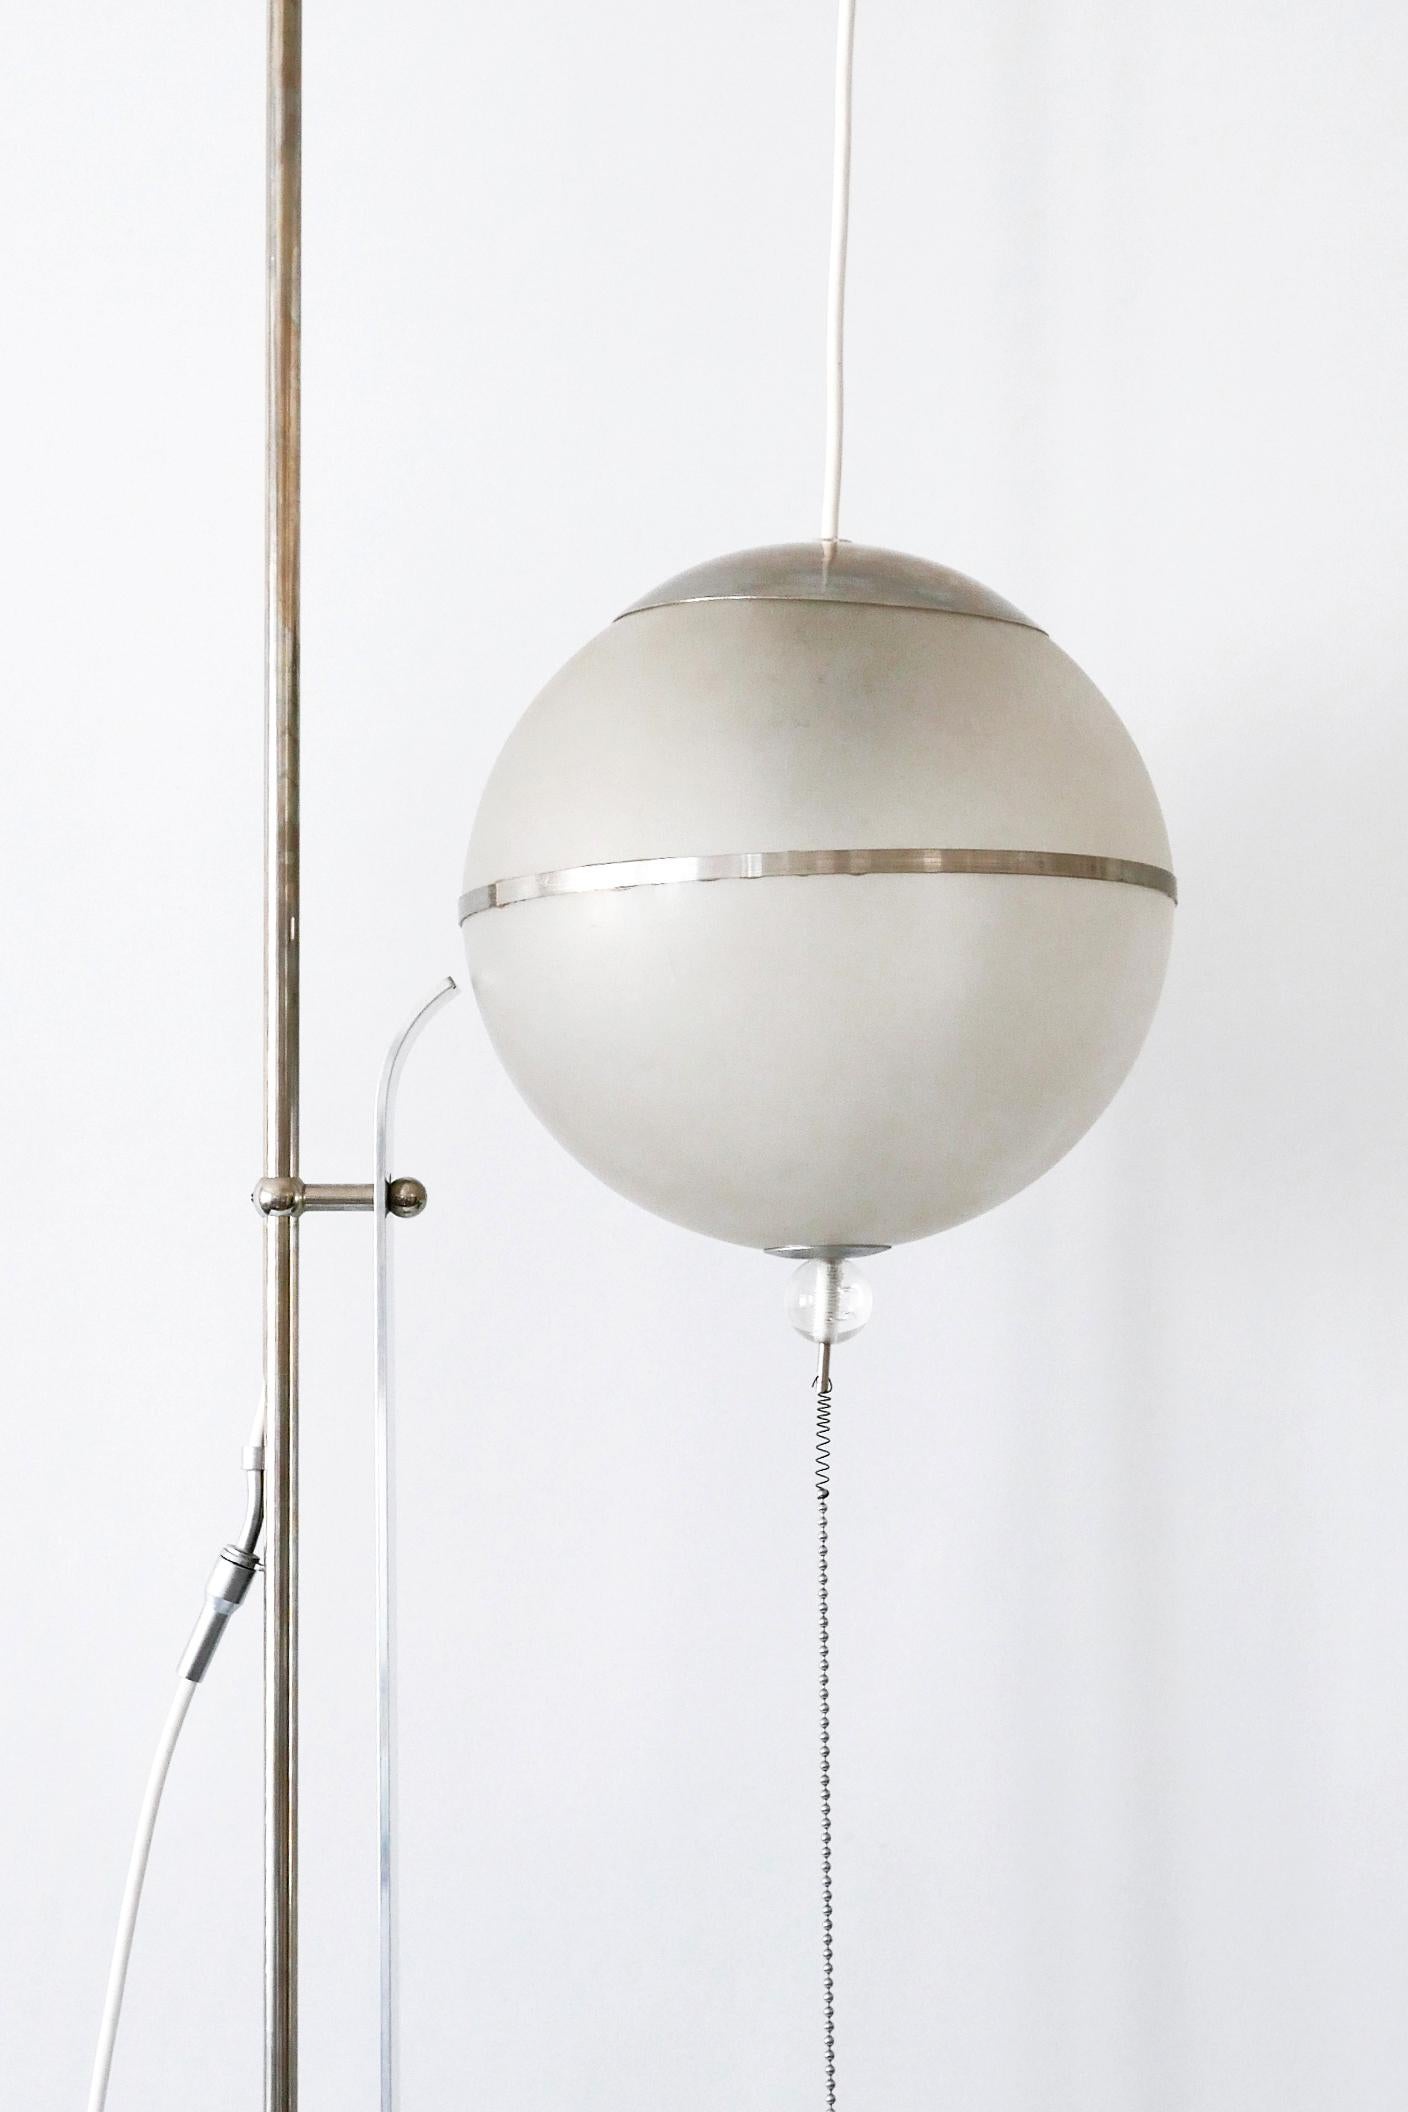 Bauhaus Floor Lamp by Karl Trabert for Schanzenbach & Co 1930s Germany For Sale 7